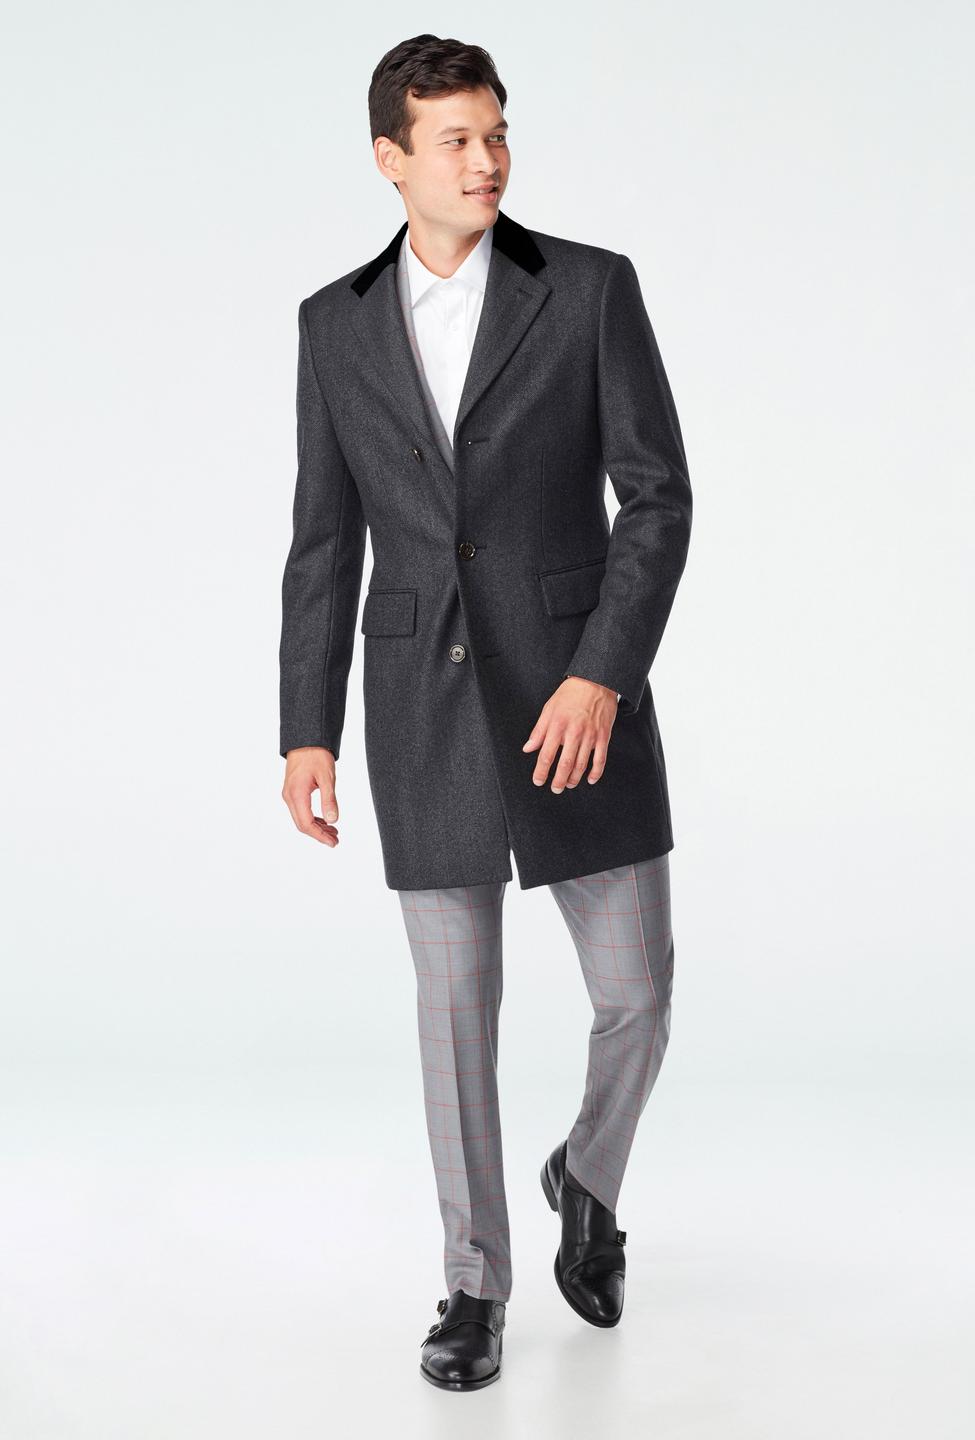 Gray outerwear - Herringbone Design from Indochino Collection